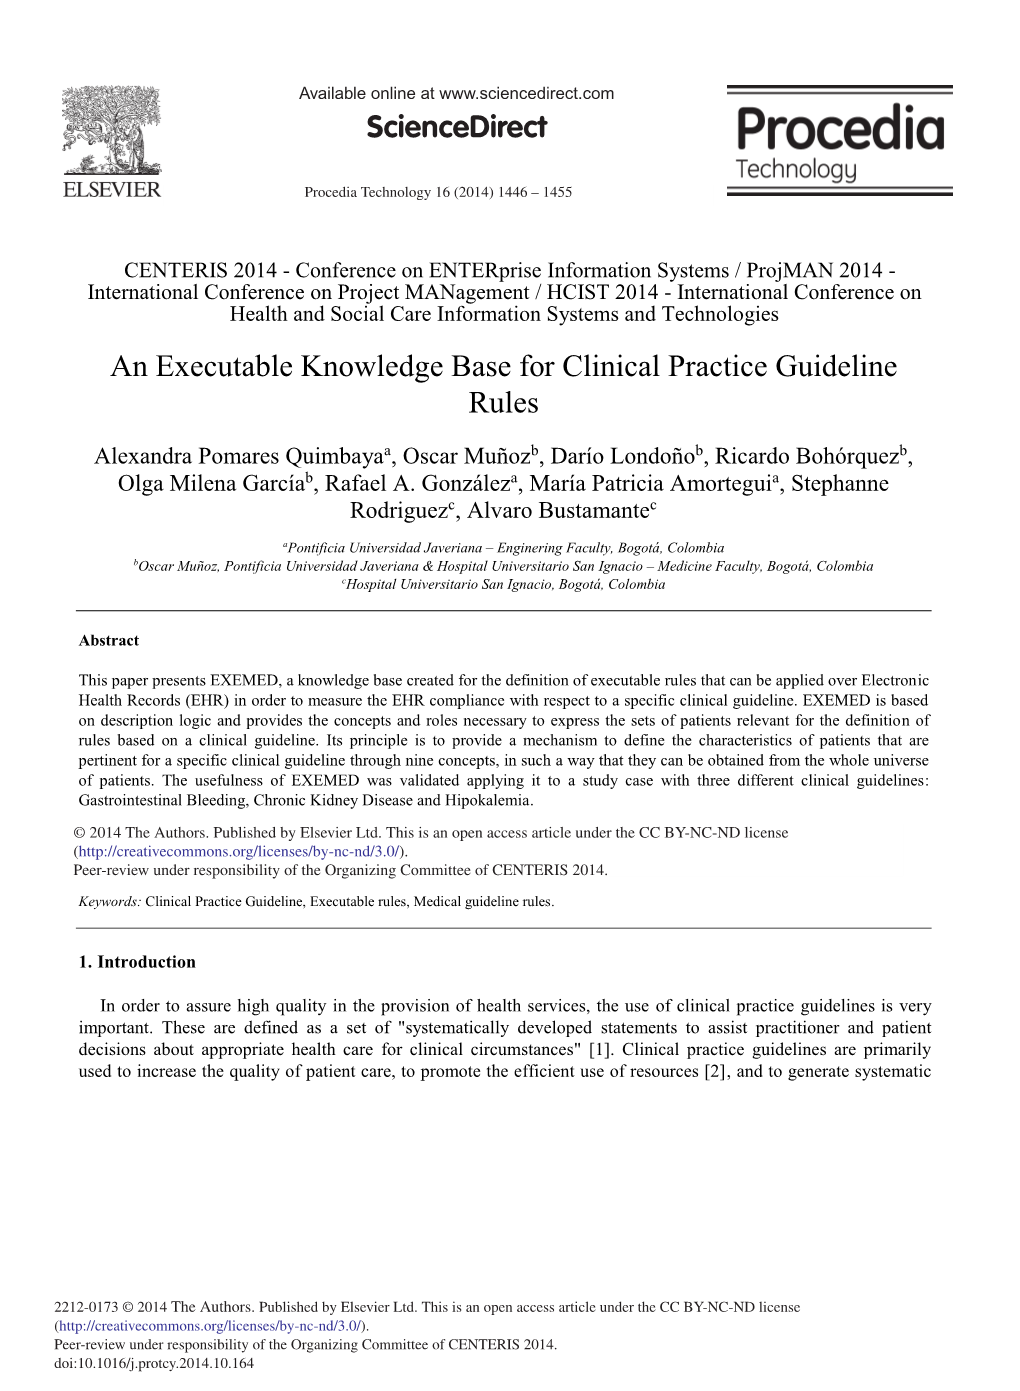 An Executable Knowledge Base for Clinical Practice Guideline Rules